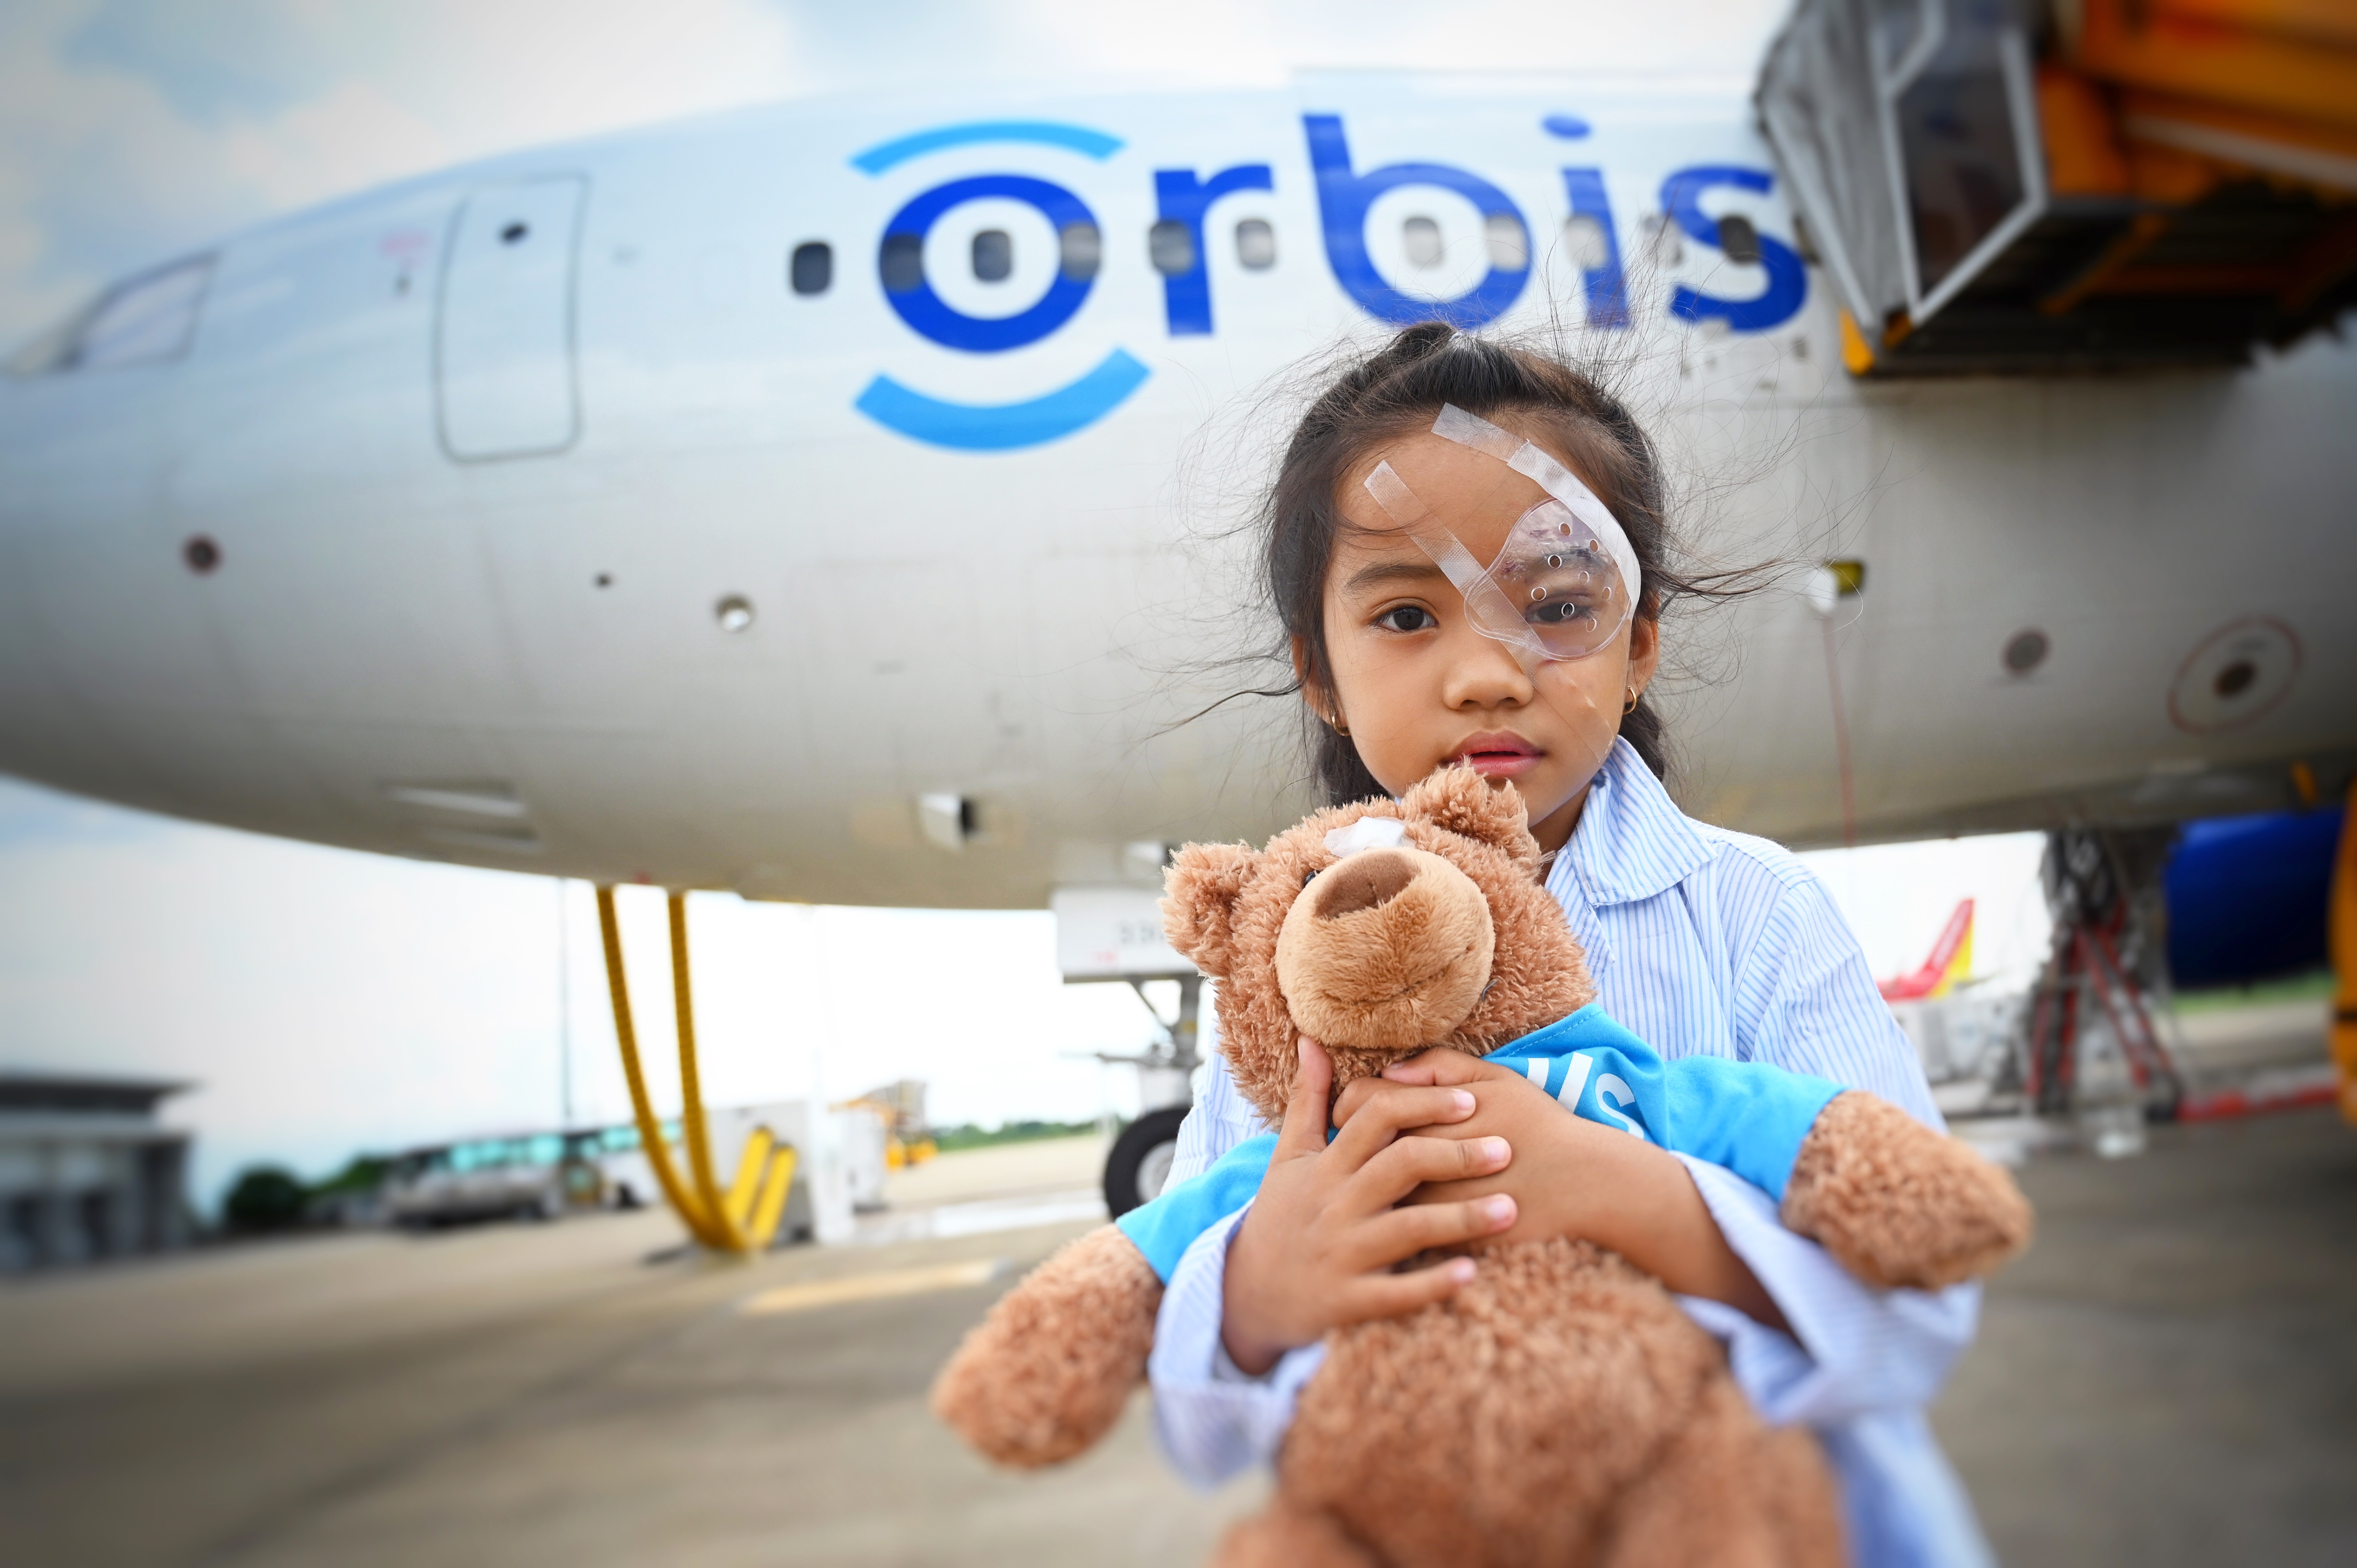 A child who received help from Orbis International standing in front of a plane